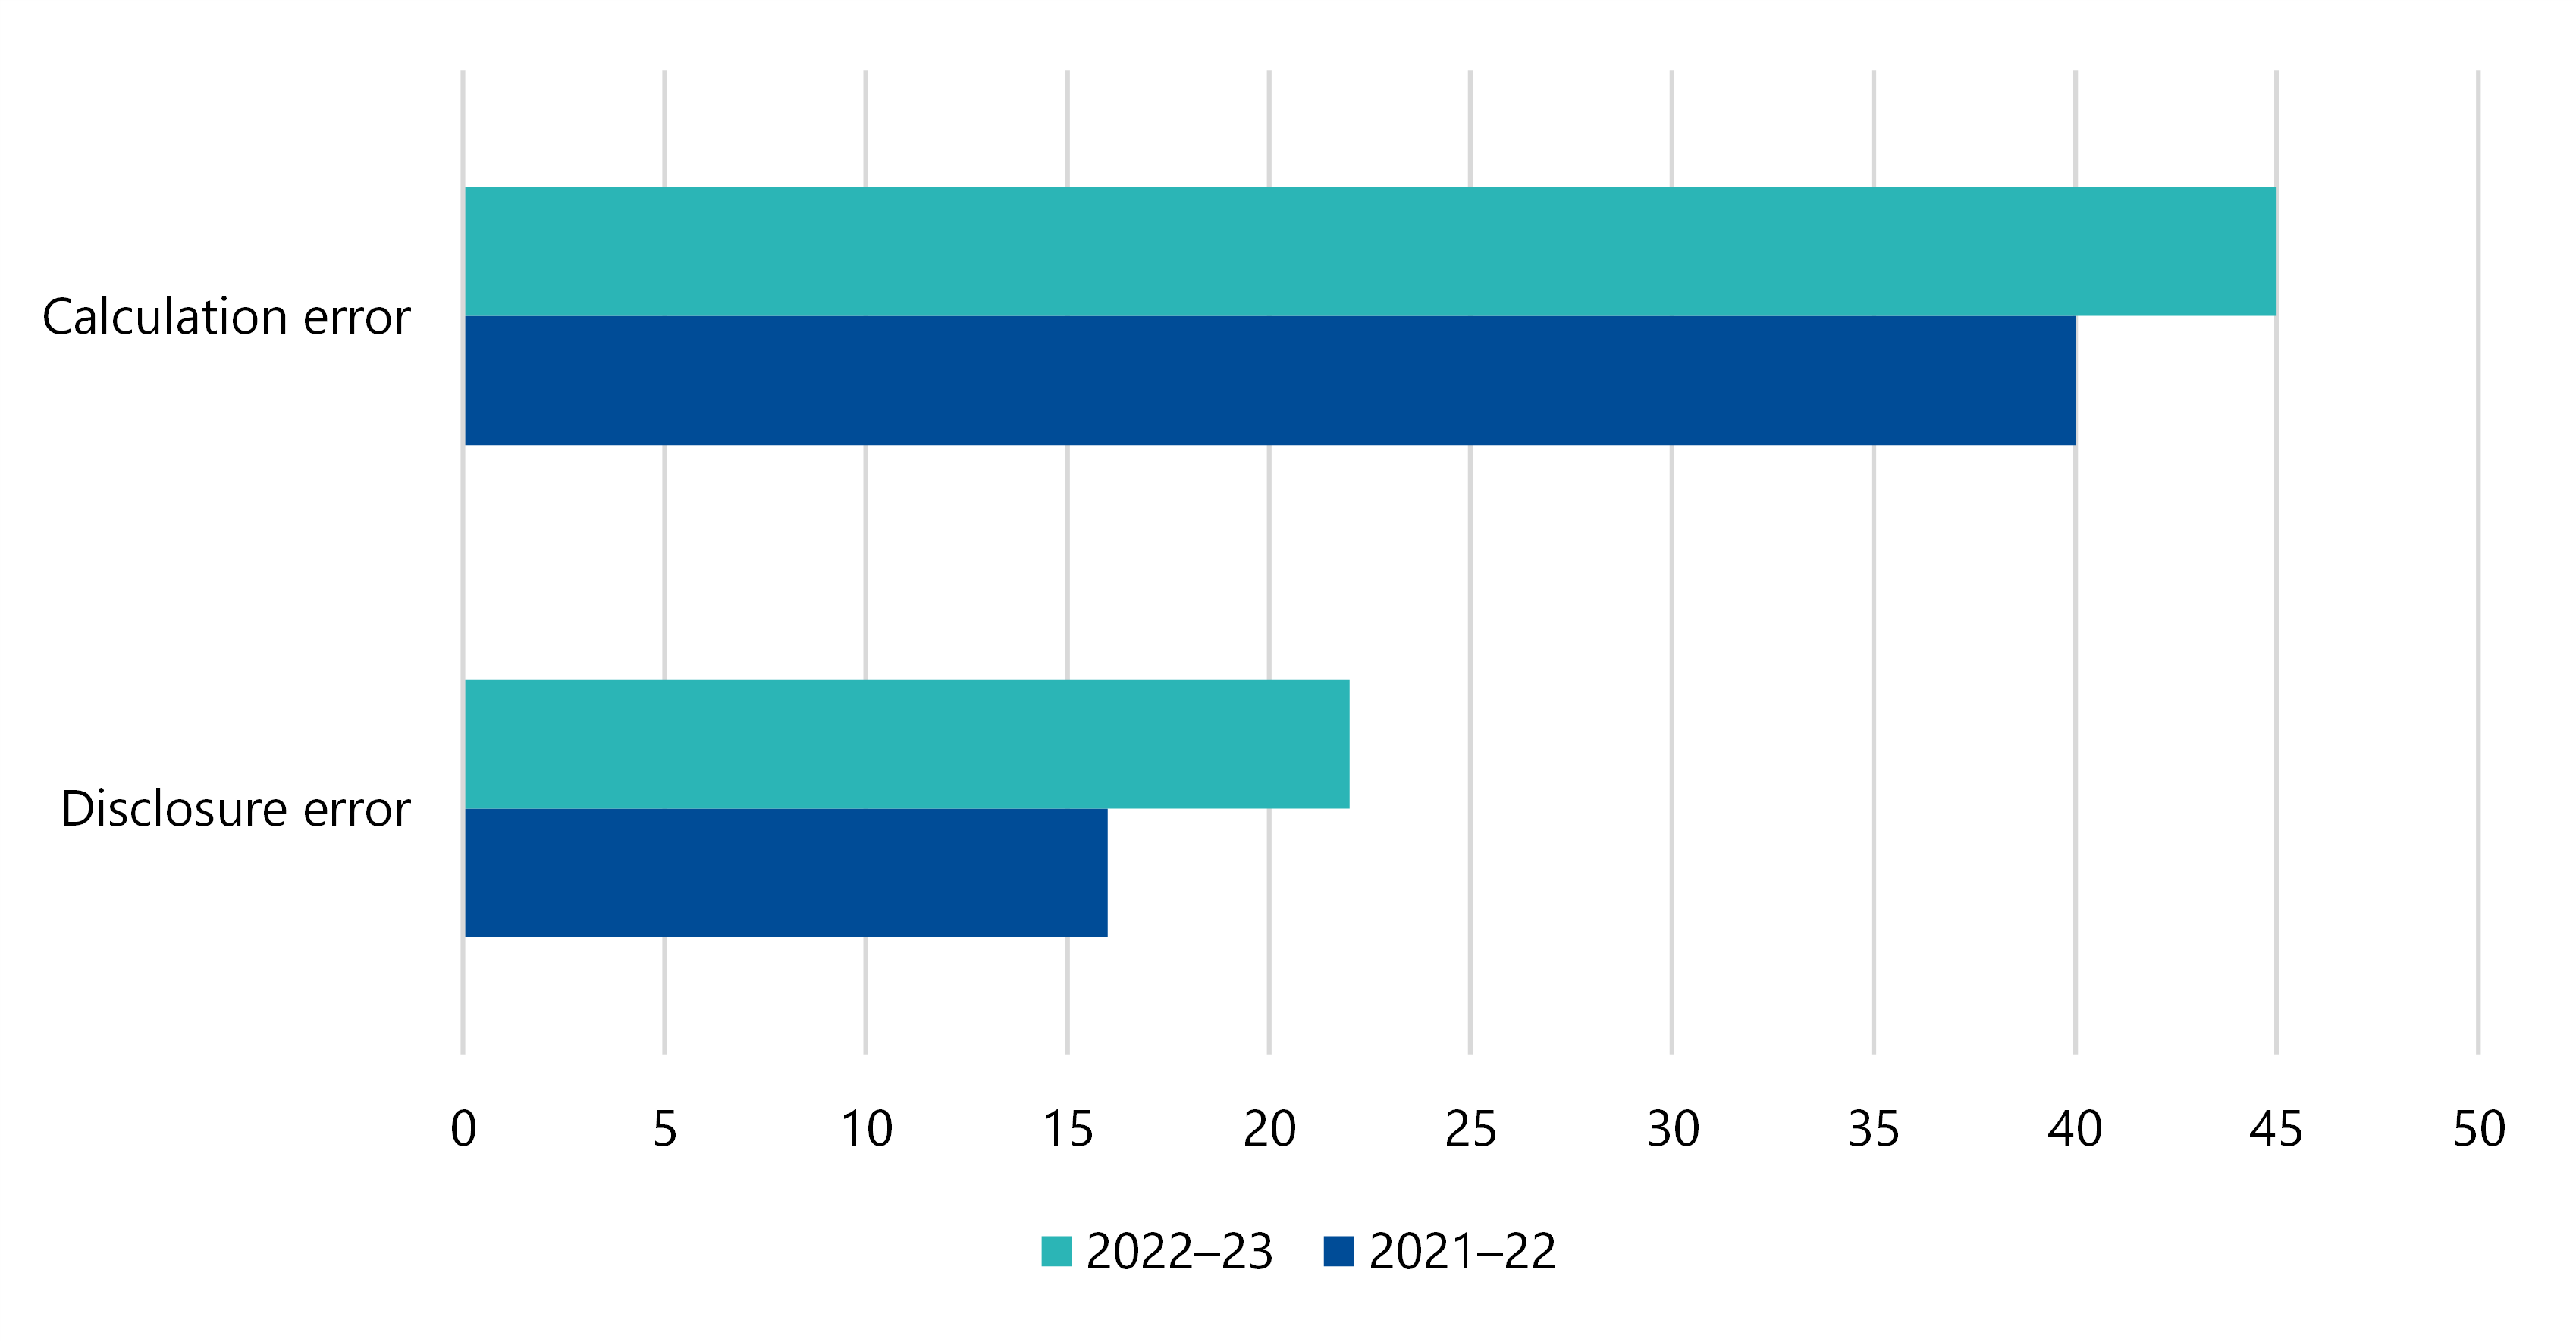 Figure 5 is a combo bar chart showing that, calculation errors increased from 40 in 2021–22 to 45 in 2022–23. Disclosure errors also increased, from 16 in 2021–22 to 22 in 2022–23.